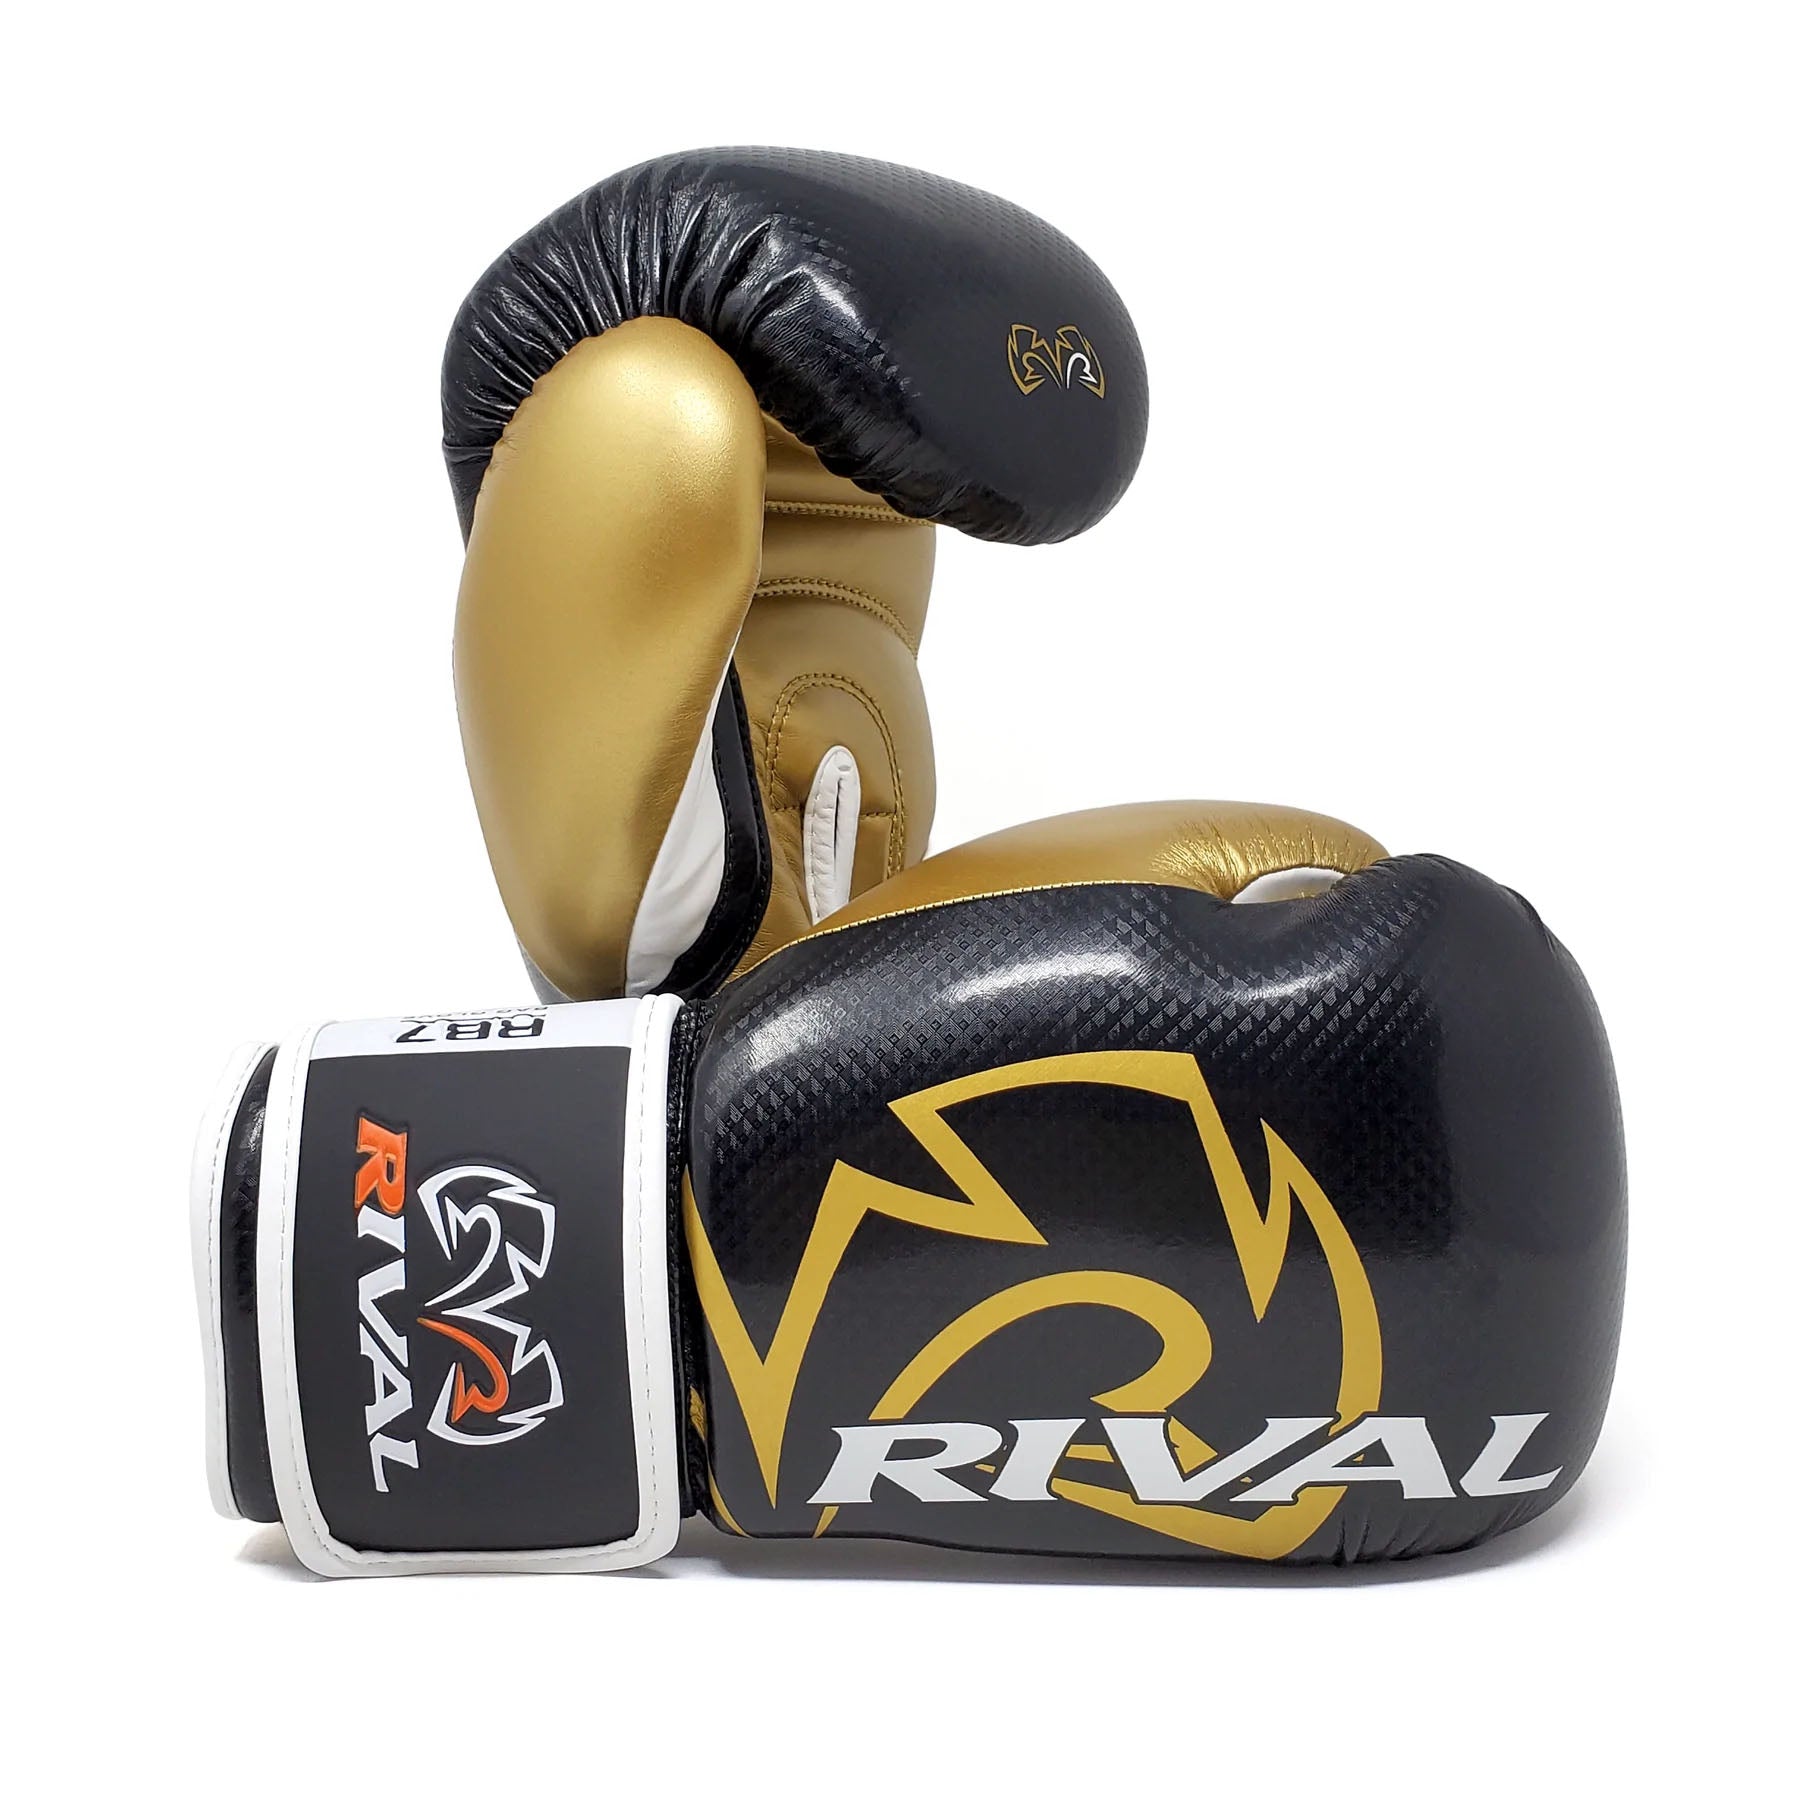 Rival RB7 Fitness Plus Bag Gloves from Sweatband.com